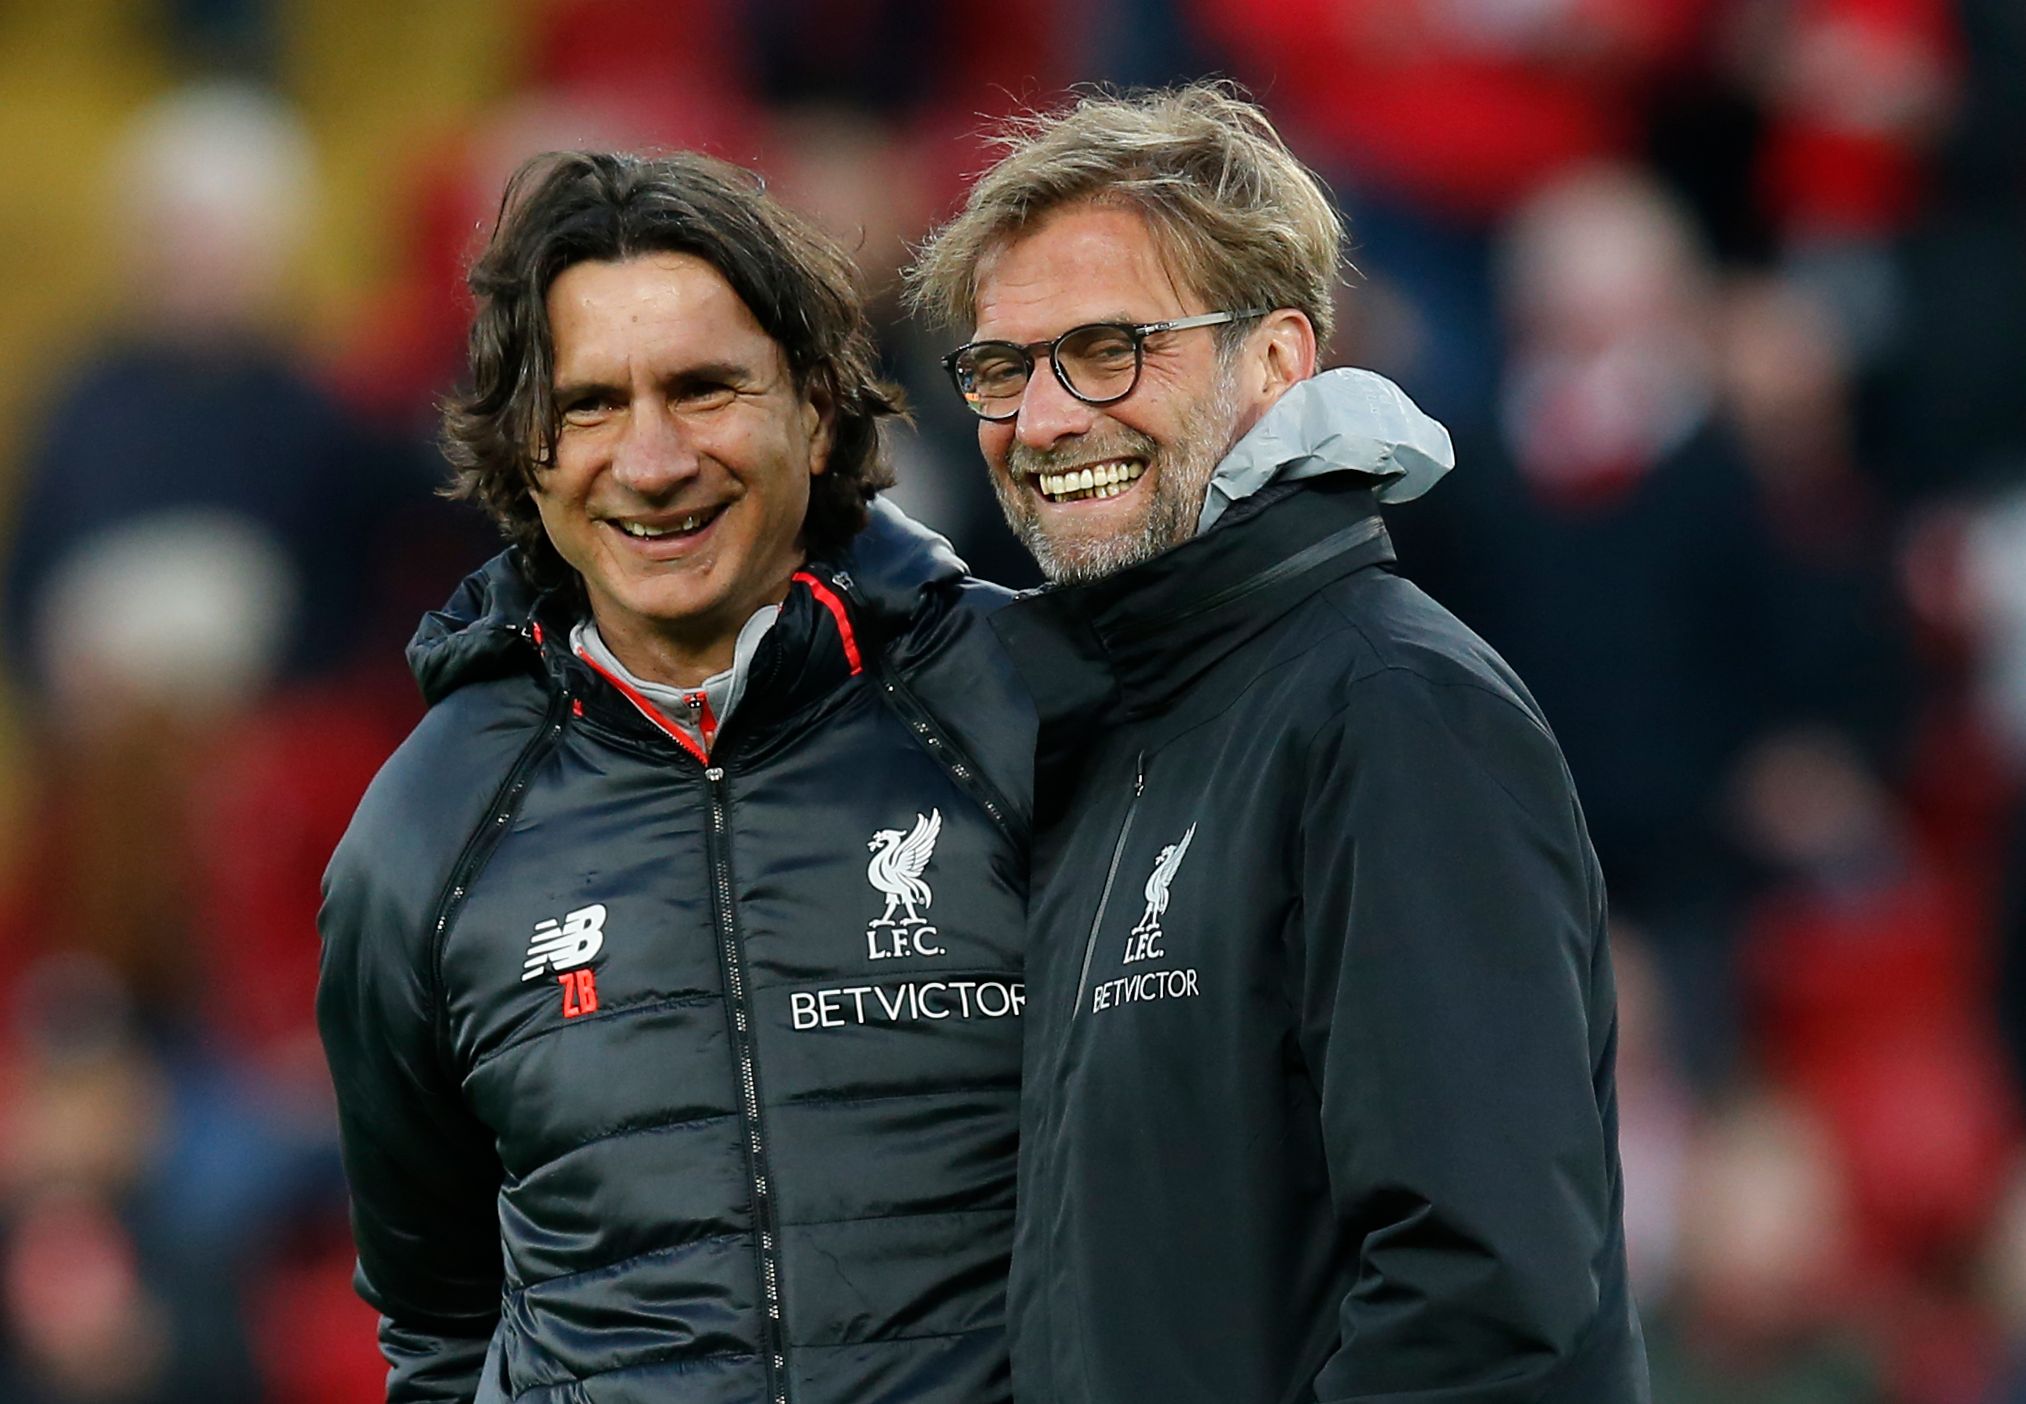 Britain Soccer Football - Liverpool v AFC Bournemouth - Premier League - Anfield - 5/4/17 Liverpool manager Juergen Klopp and assistant manager Zeljko Buvac Reuters / Andrew Yates Livepic EDITORIAL USE ONLY. No use with unauthorized audio, video, data, fixture lists, club/league logos or 